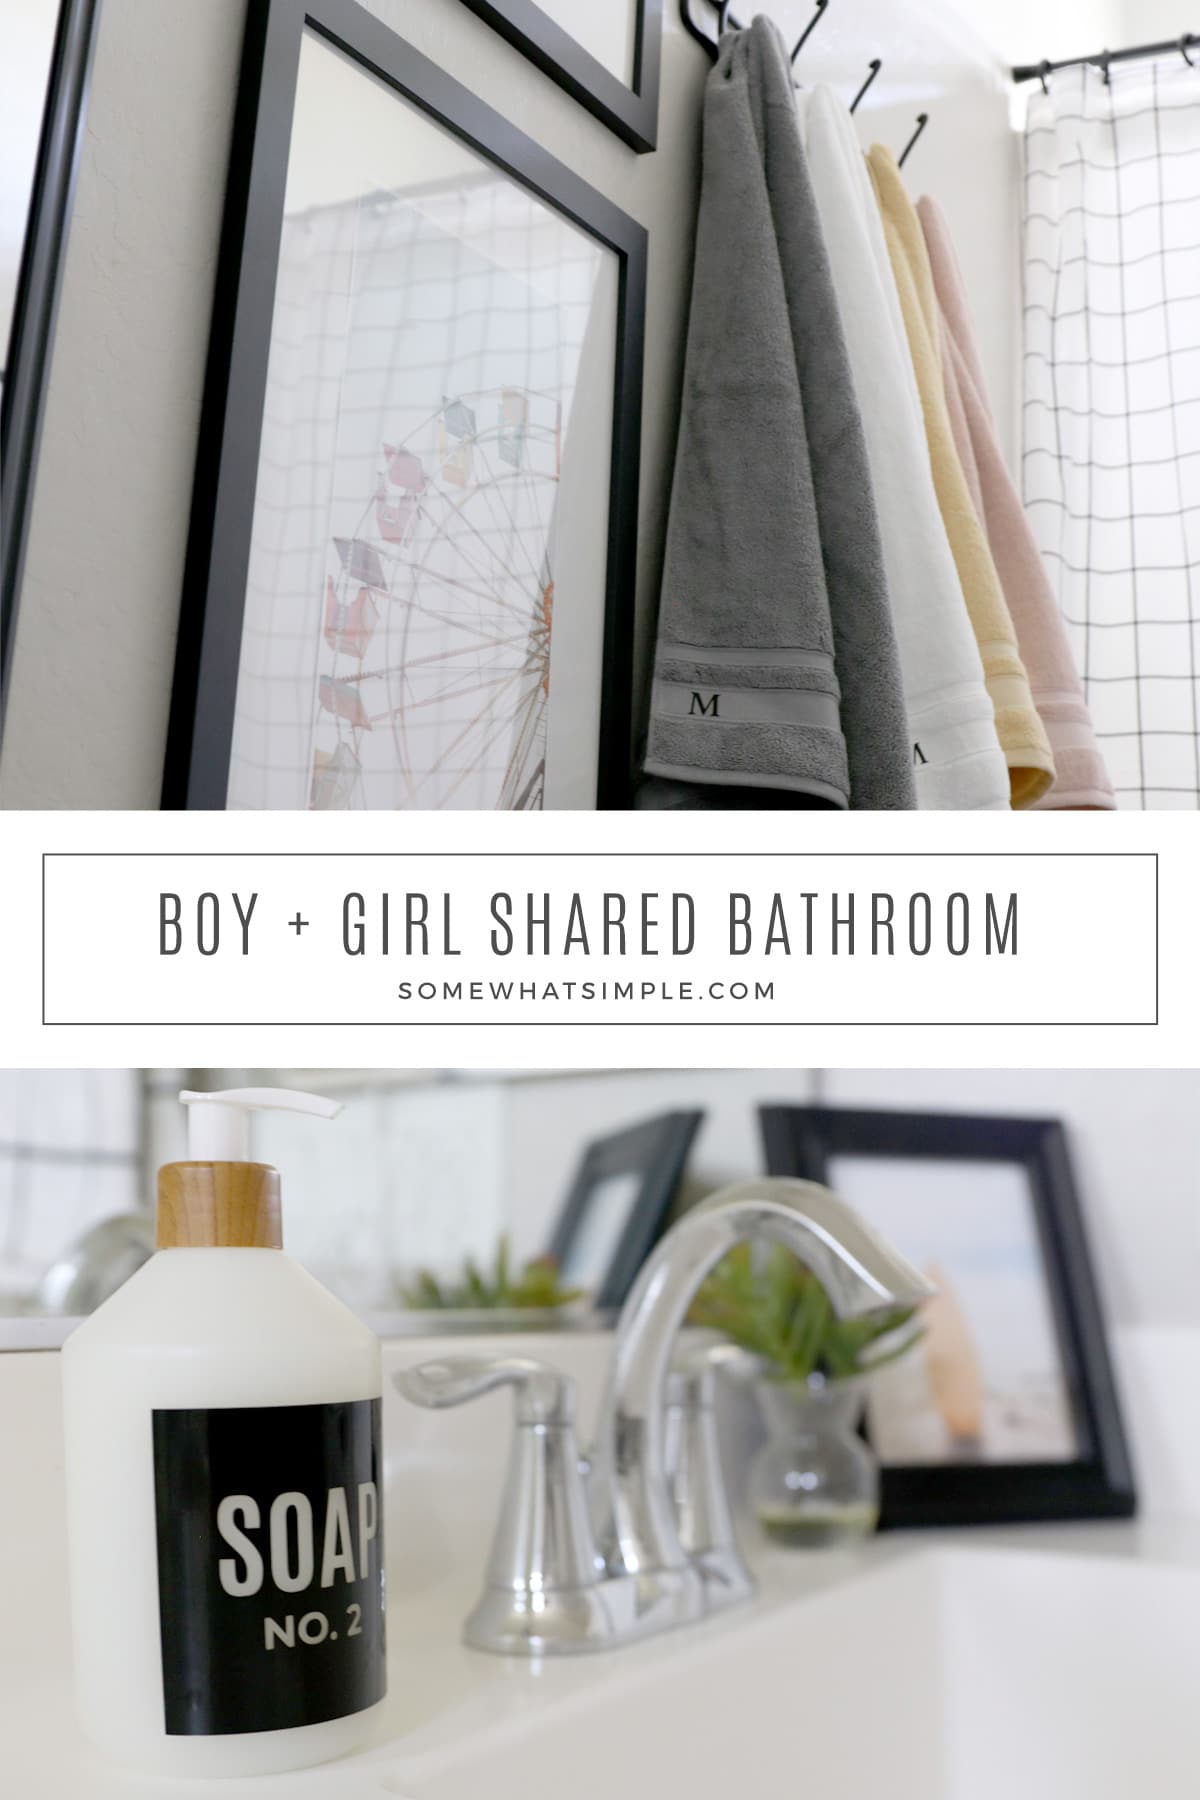 Give your kid's bathroom a much-needed refresh with some simple monogrammed towels and updated bathroom decor. via @somewhatsimple